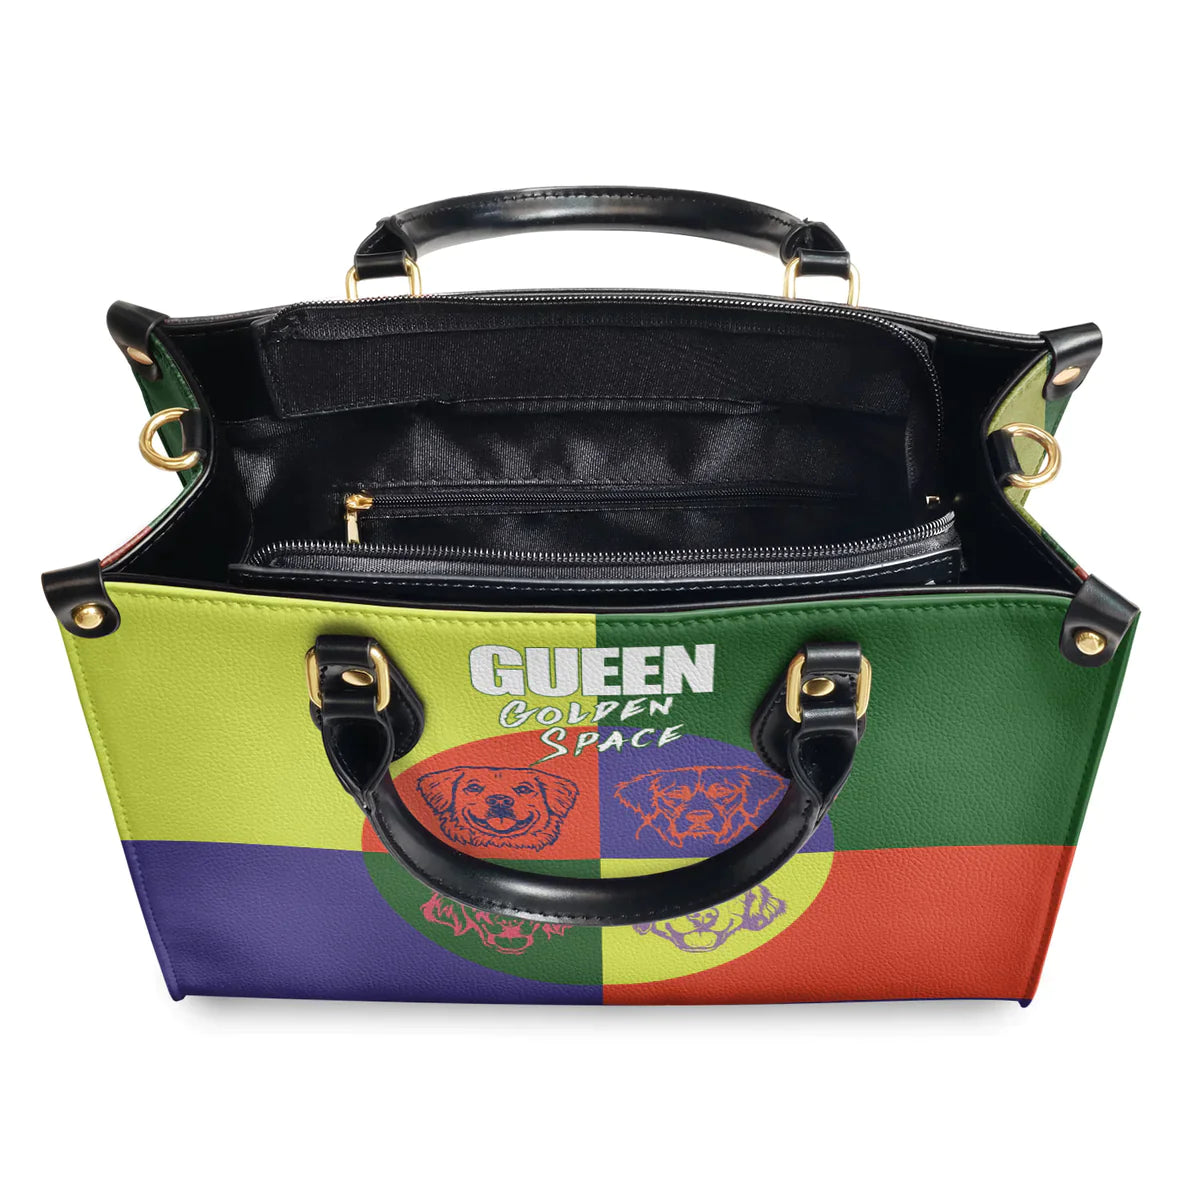 Gueen Golden Space Leather Bag